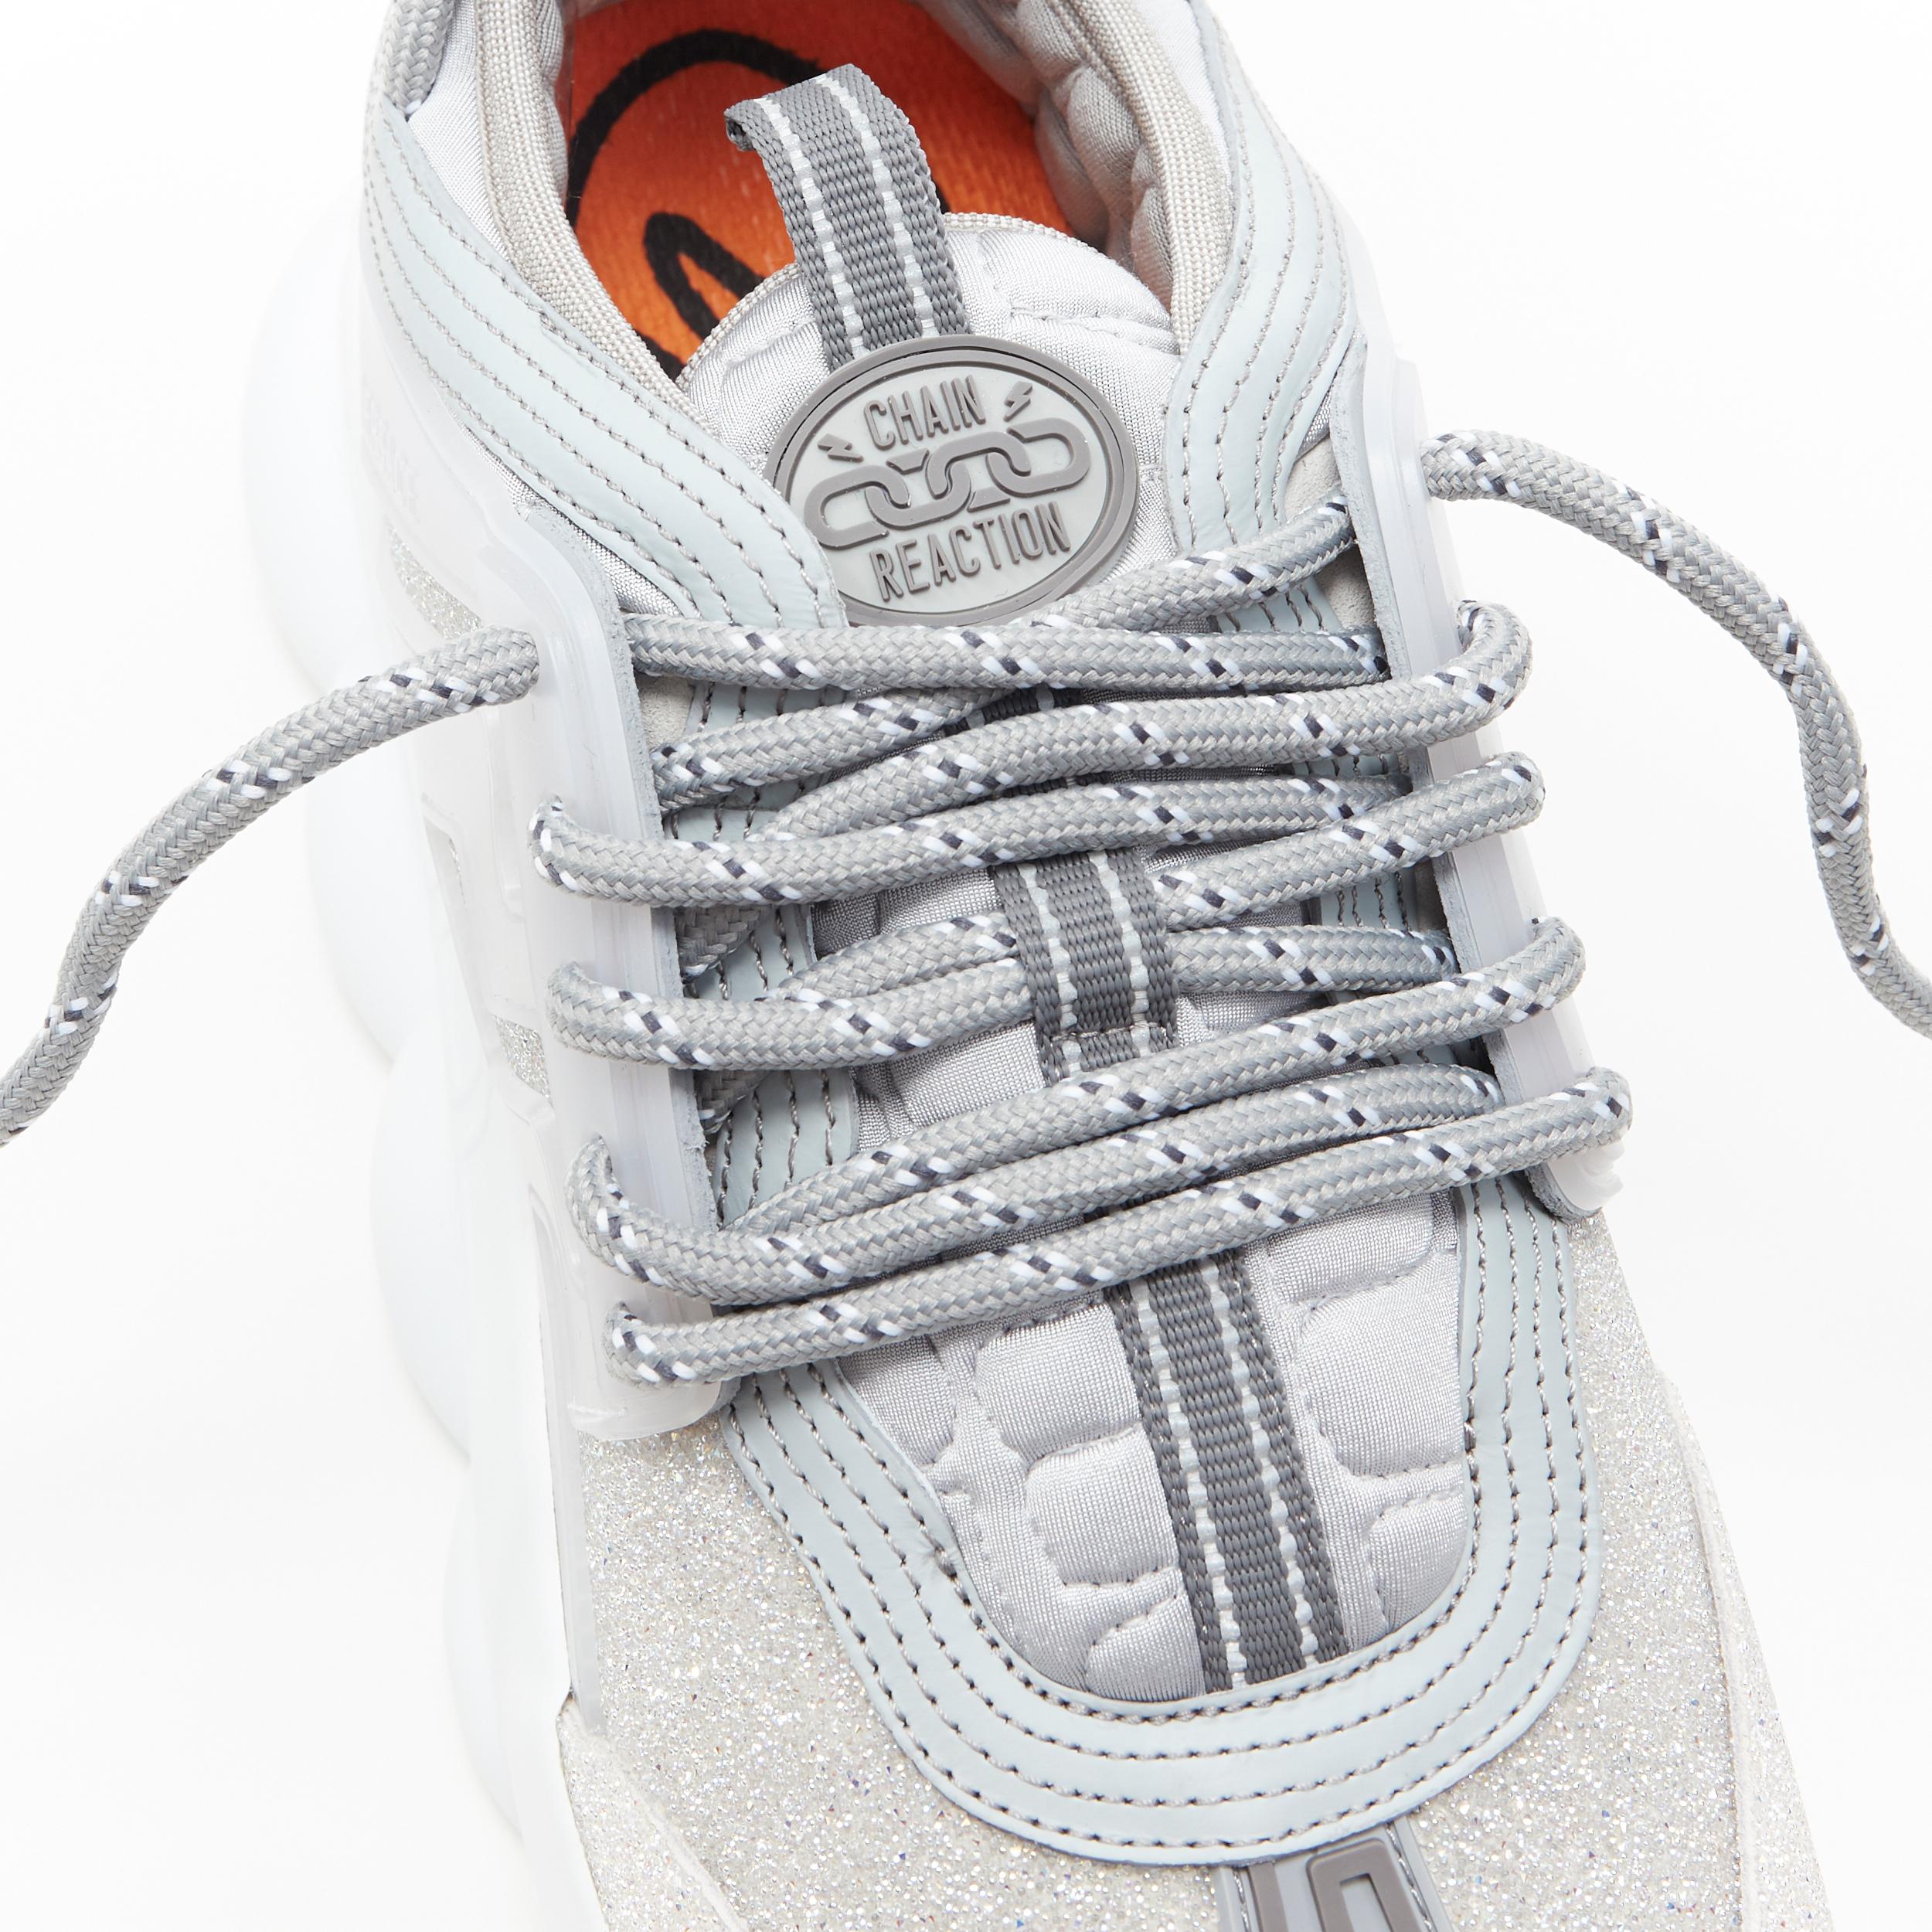 new VERSACE Chain Reaction Reflective Silver Crystal Rhinestone sneaker EU41 US8 For Sale 7